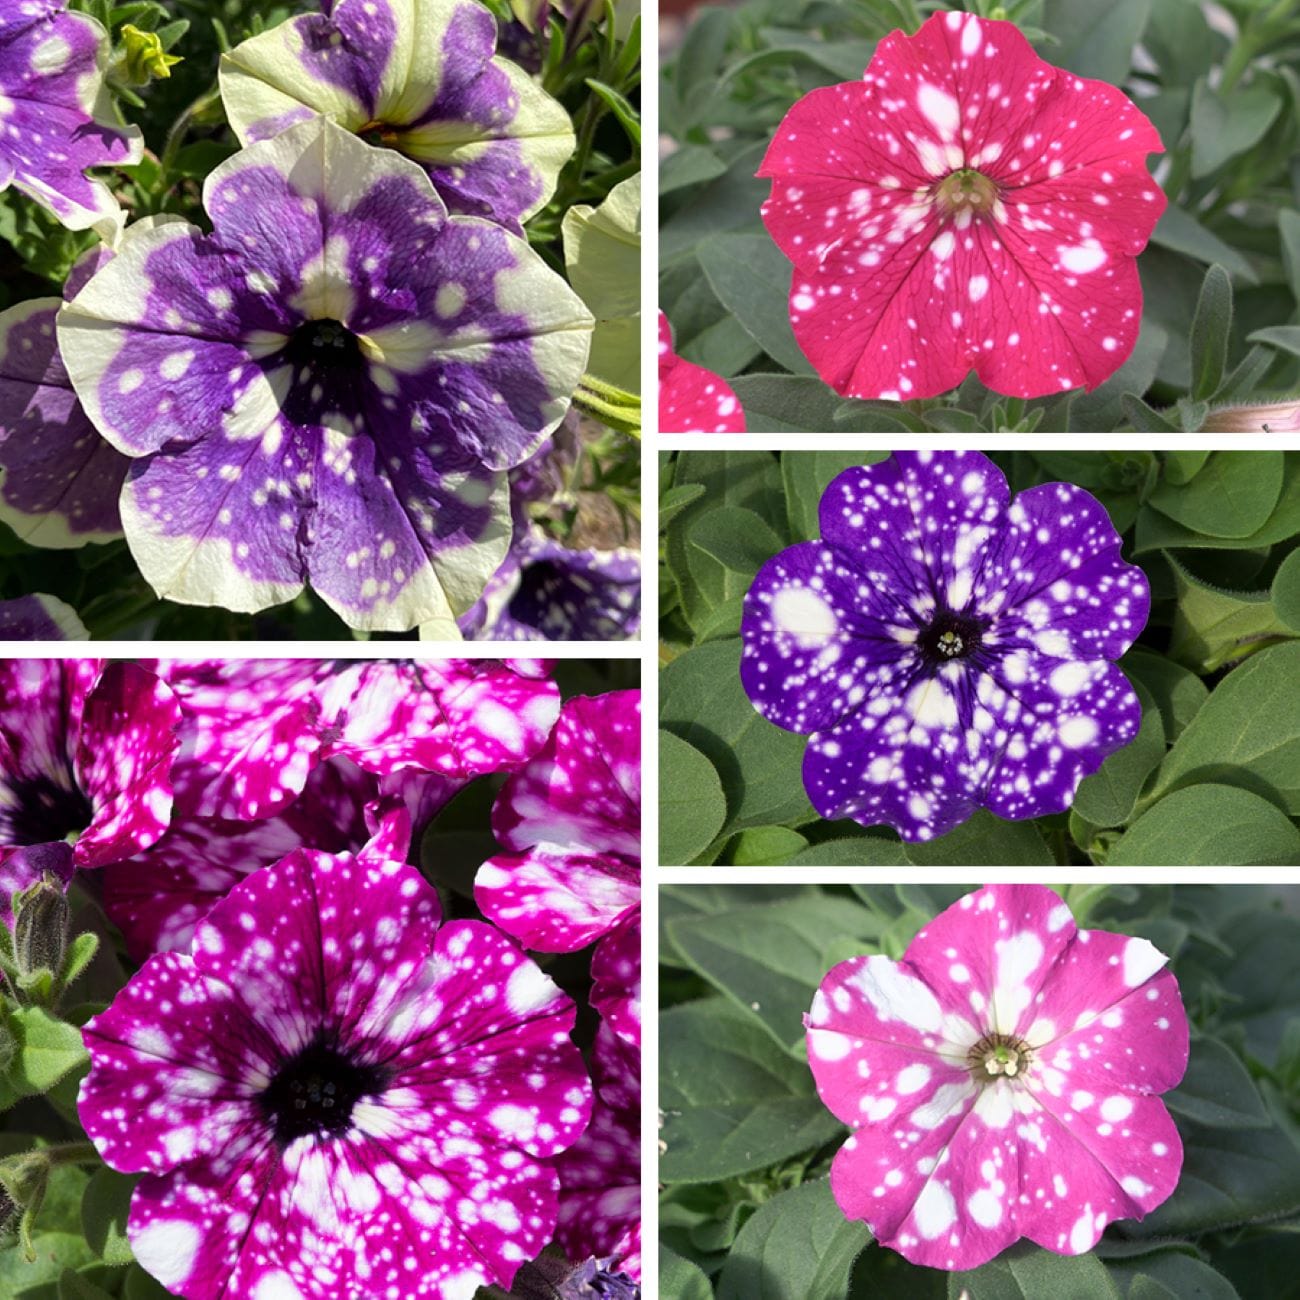 dt-brown FLOWER PLANTS 5 x young plants, 3 of each variety Petunia Sparkling Sky